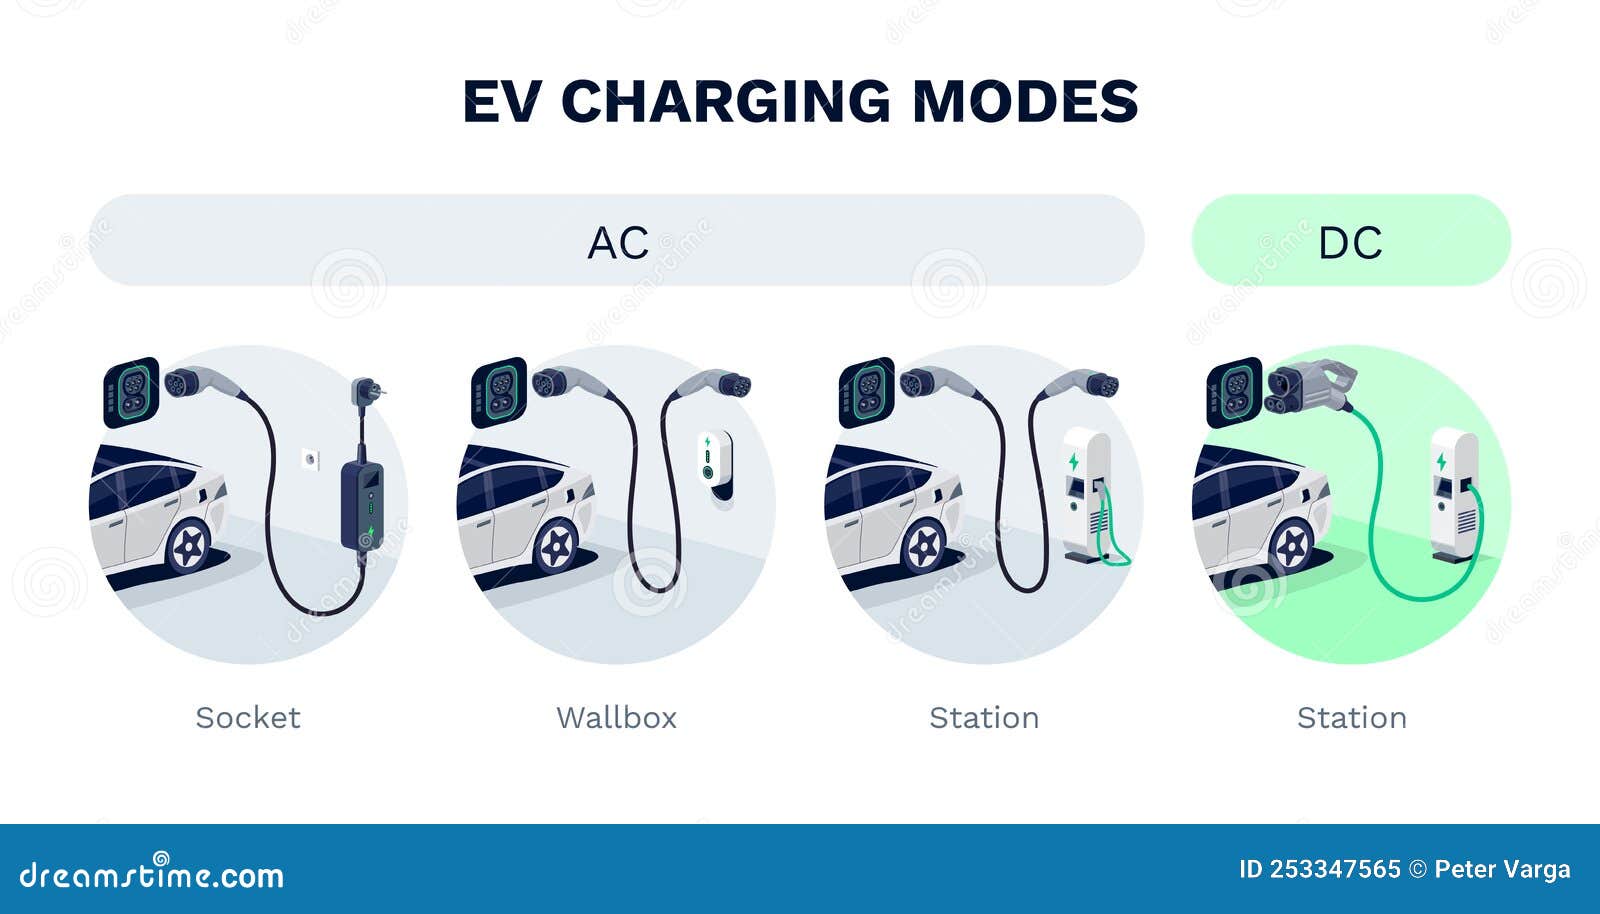 EV Charging Modes of Electric Car Explained. AC or DC Options with